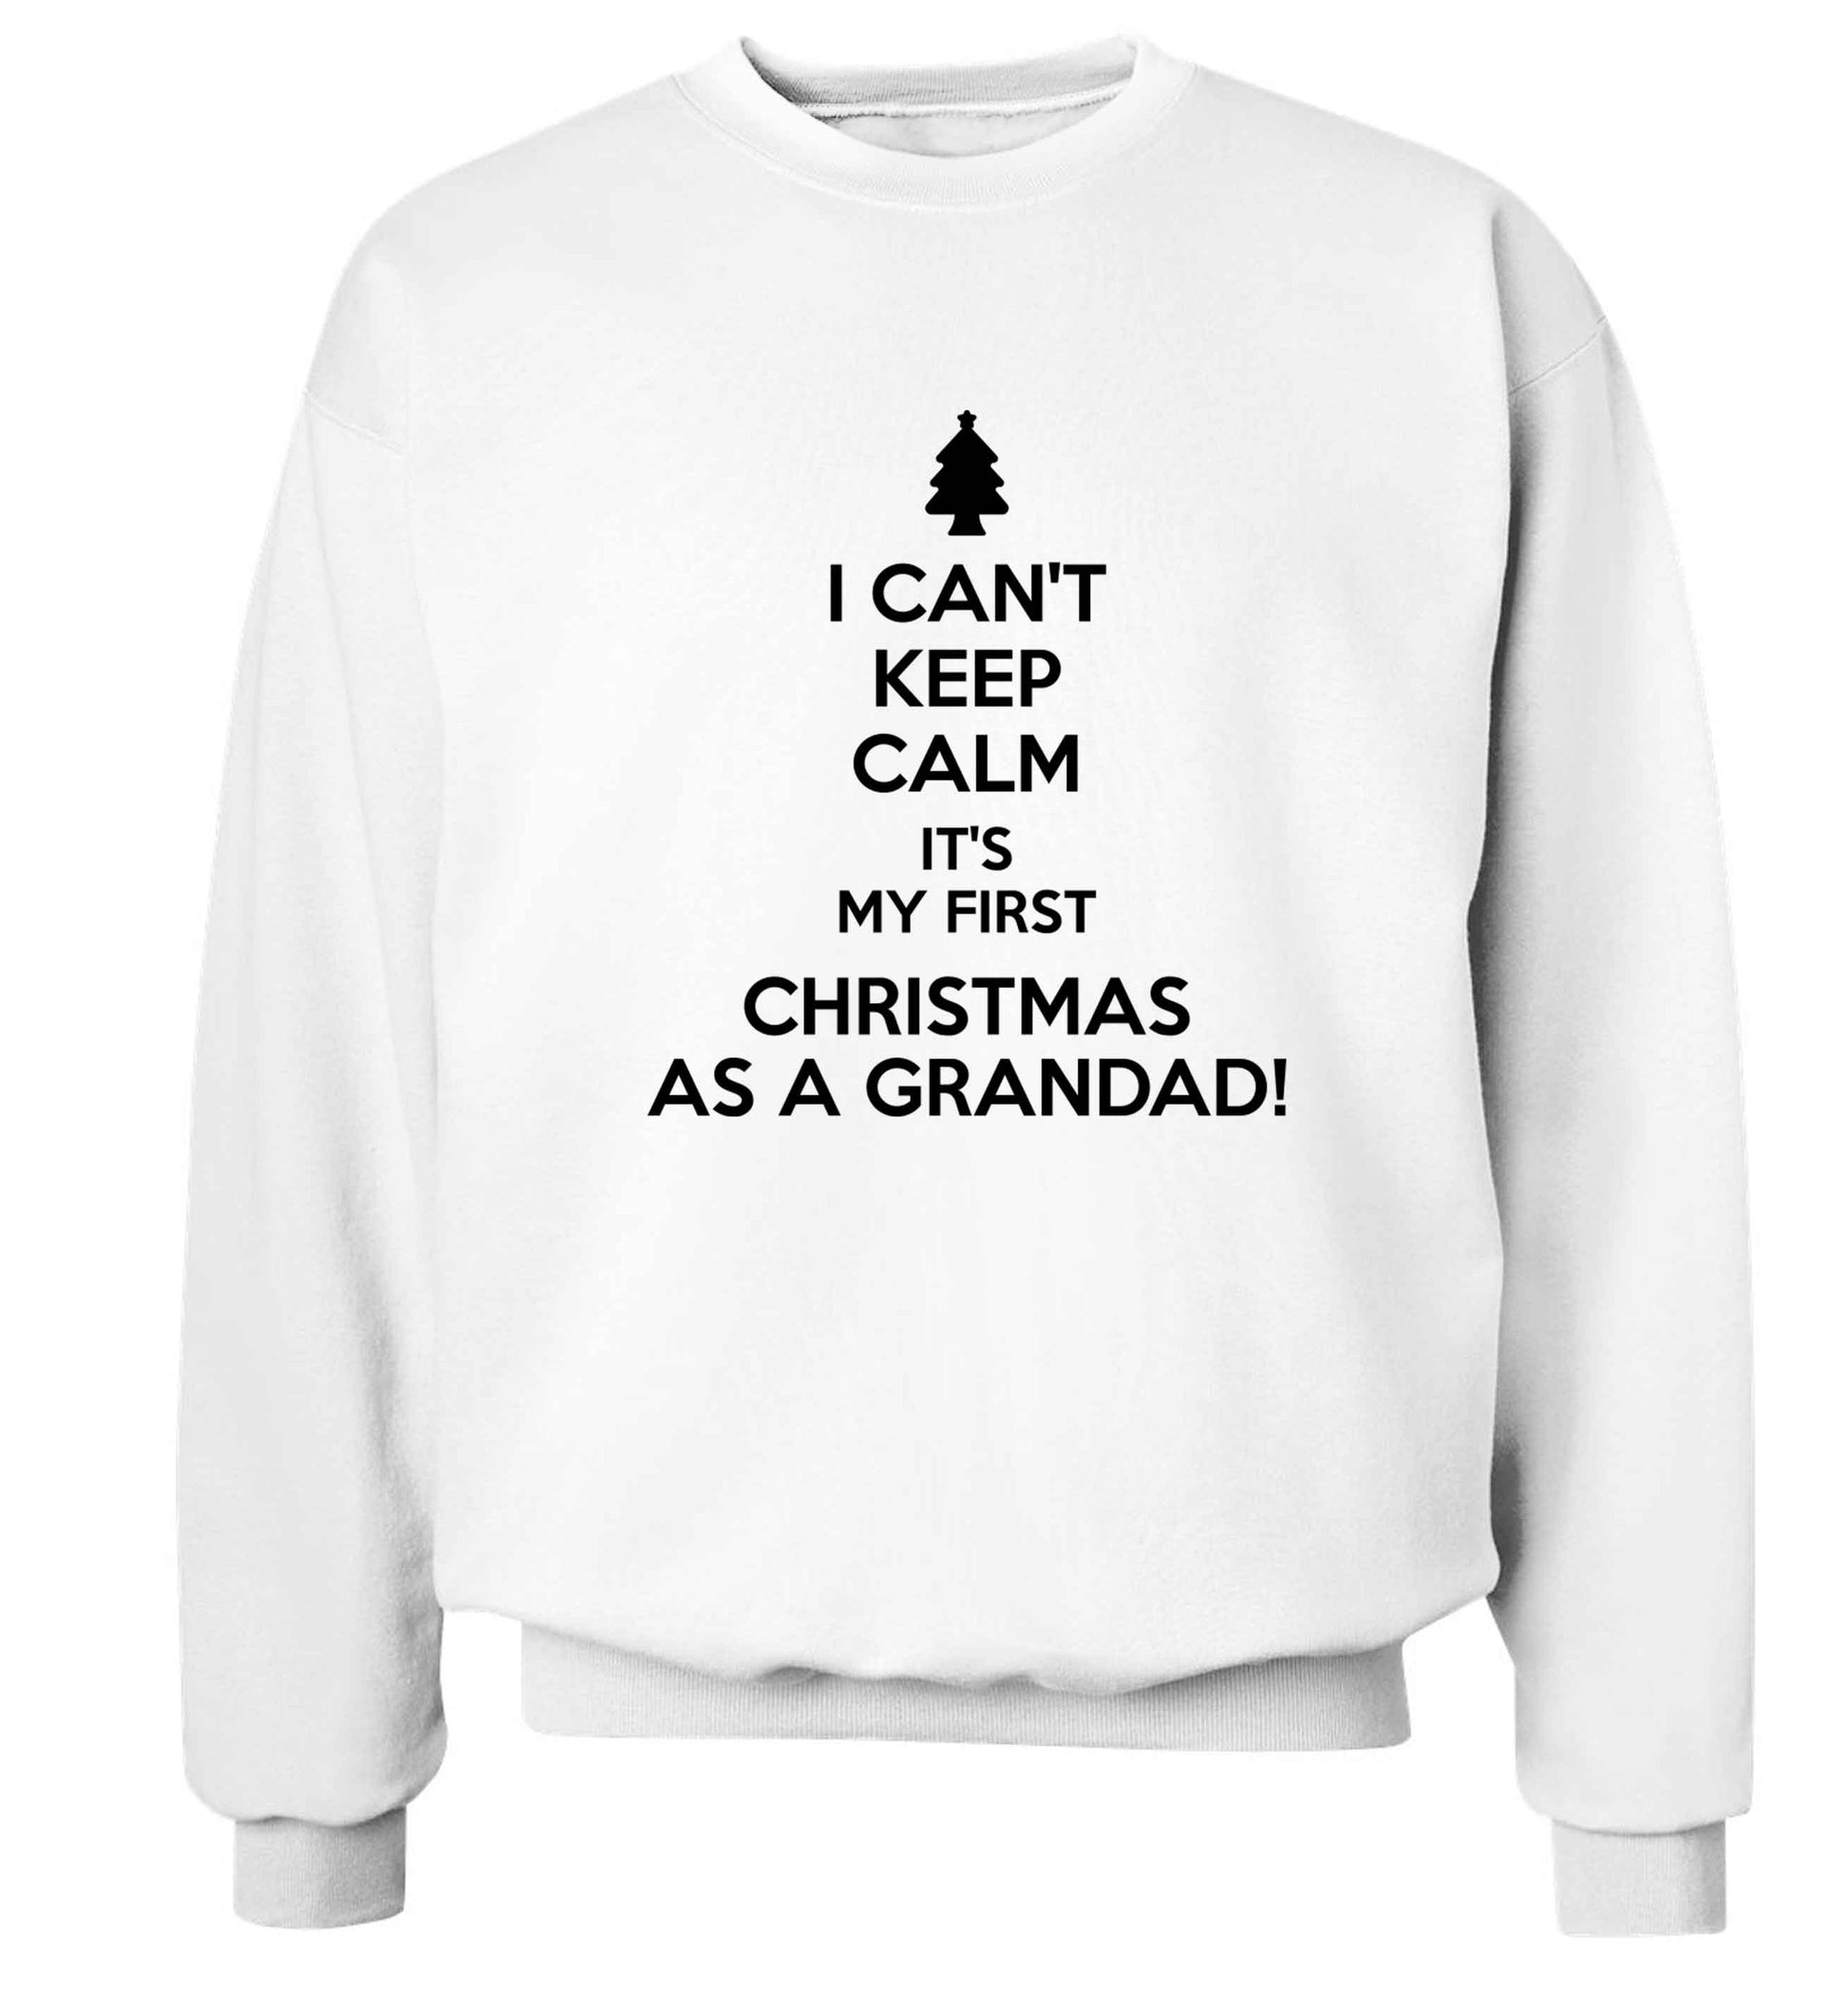 I can't keep calm it's my first Christmas as a grandad! Adult's unisex white Sweater 2XL